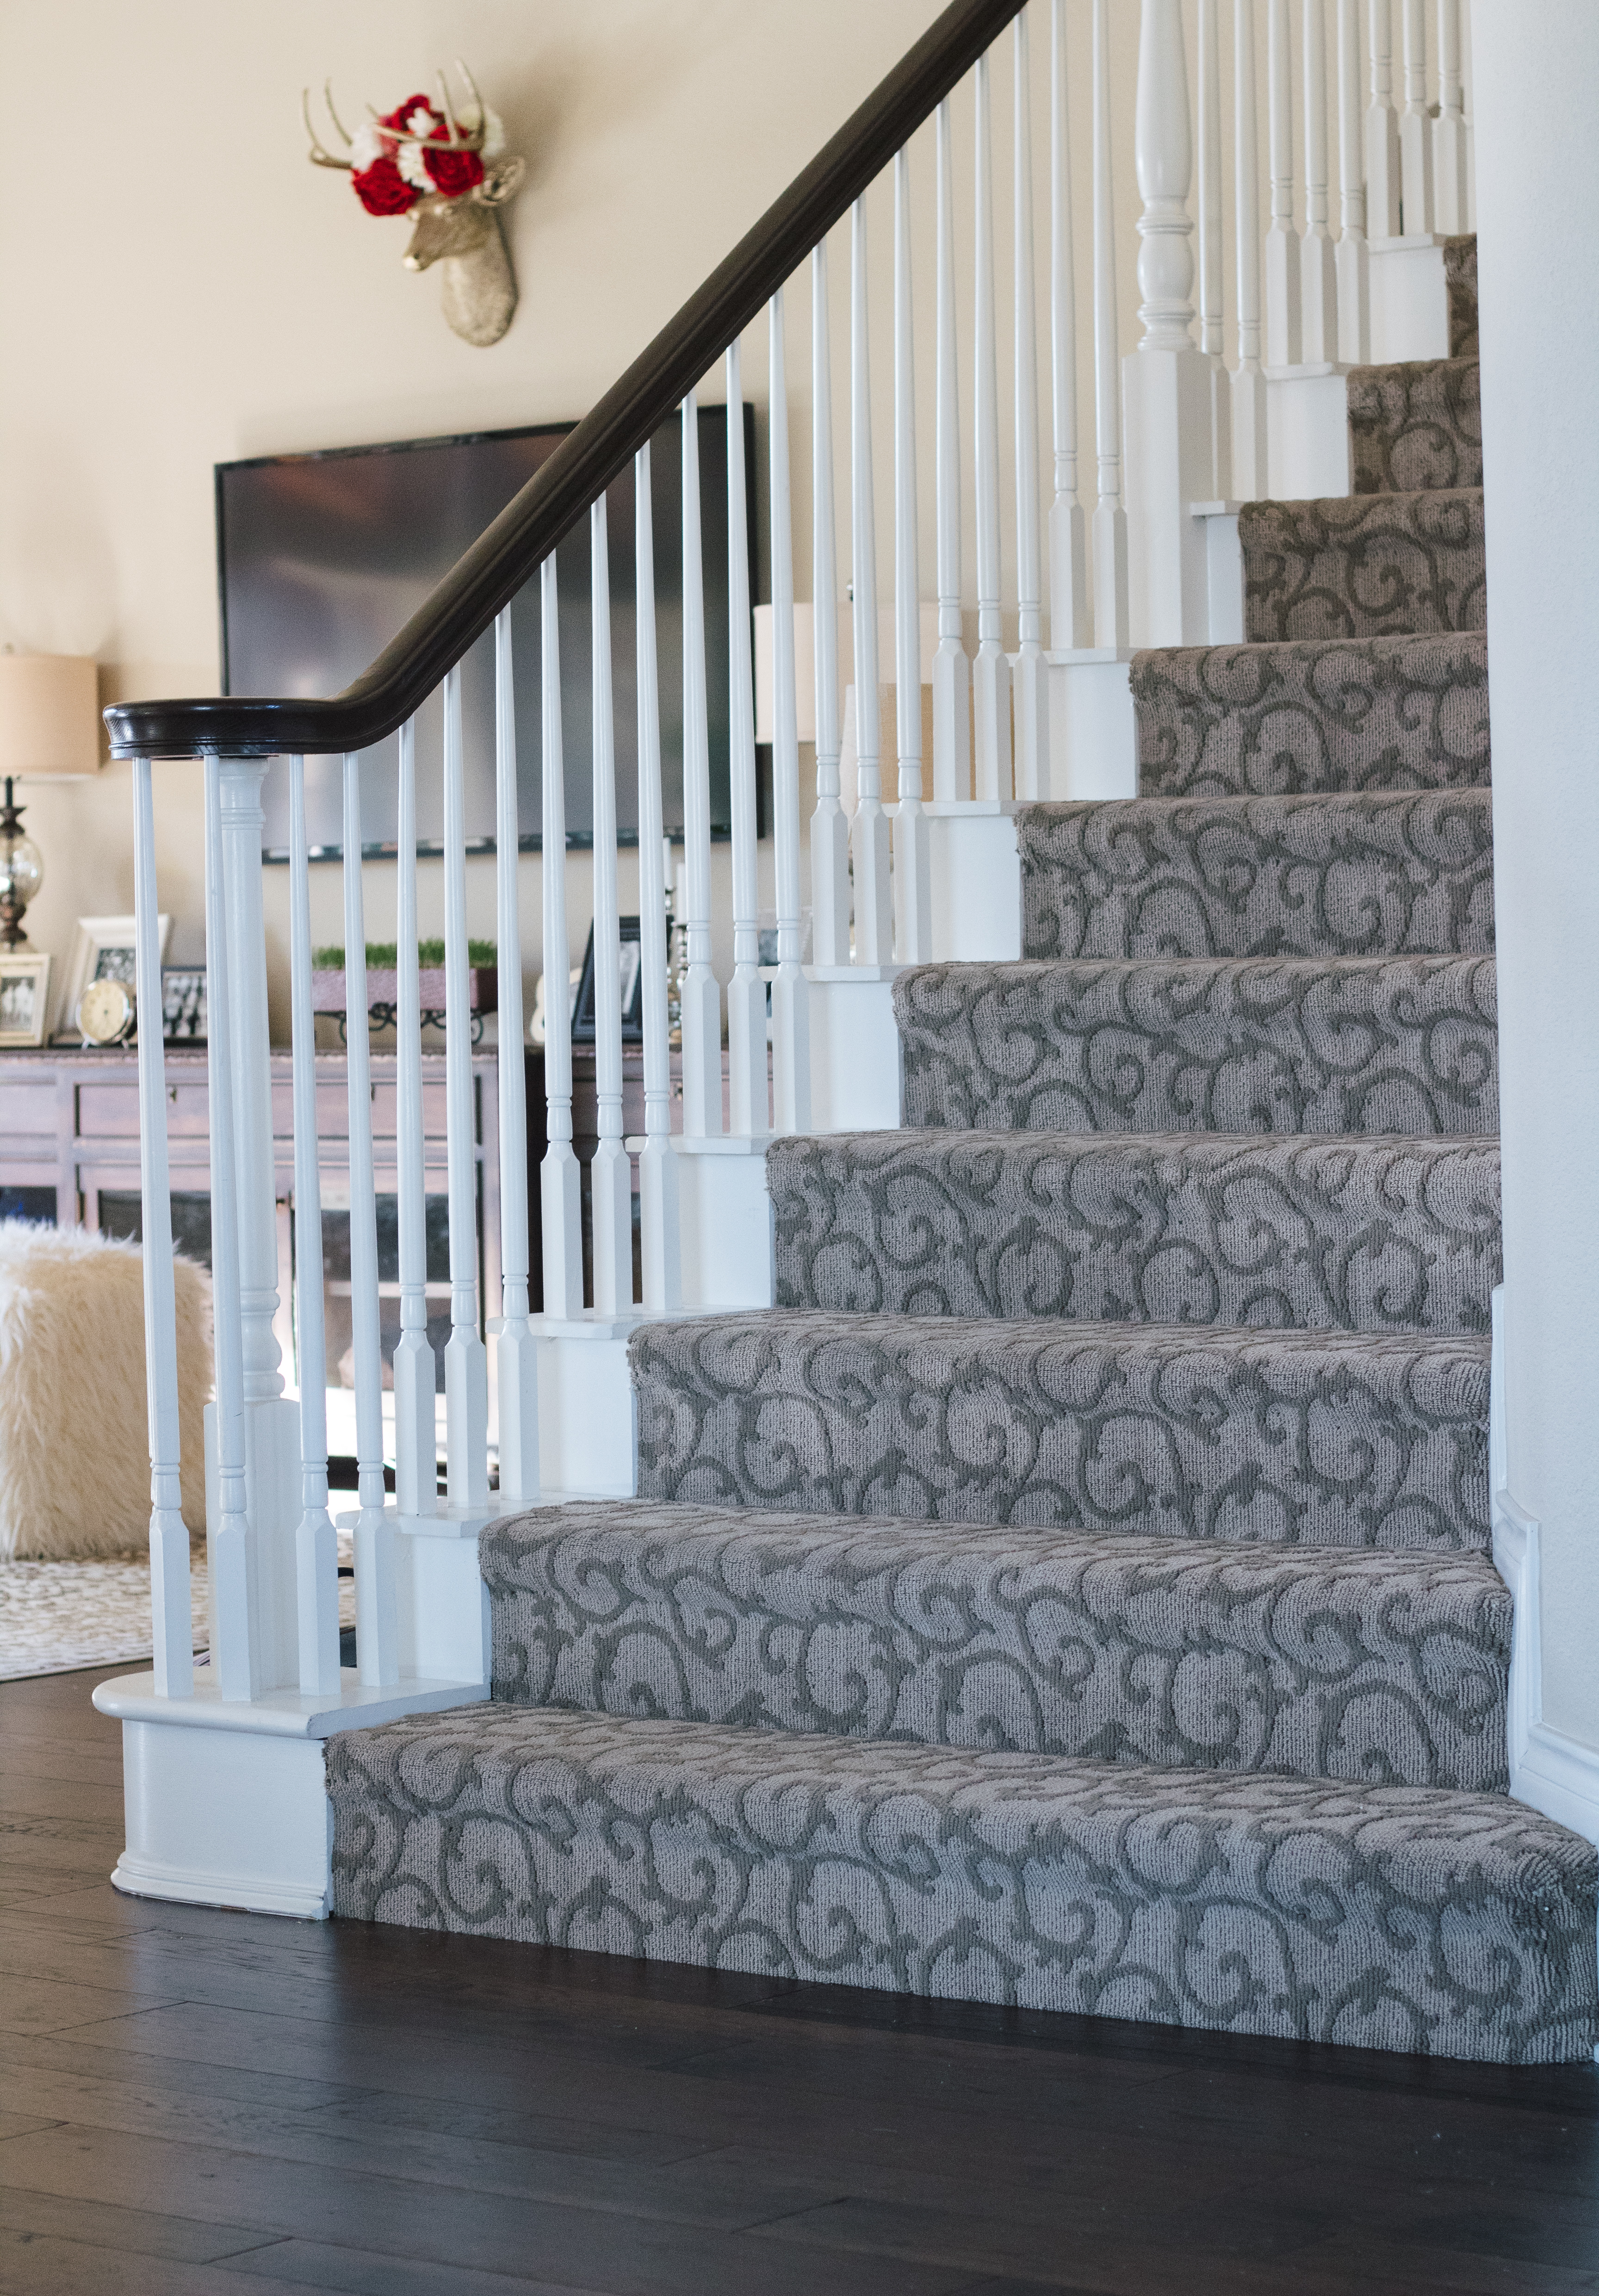 Patterned carpet on stairs with gel stain